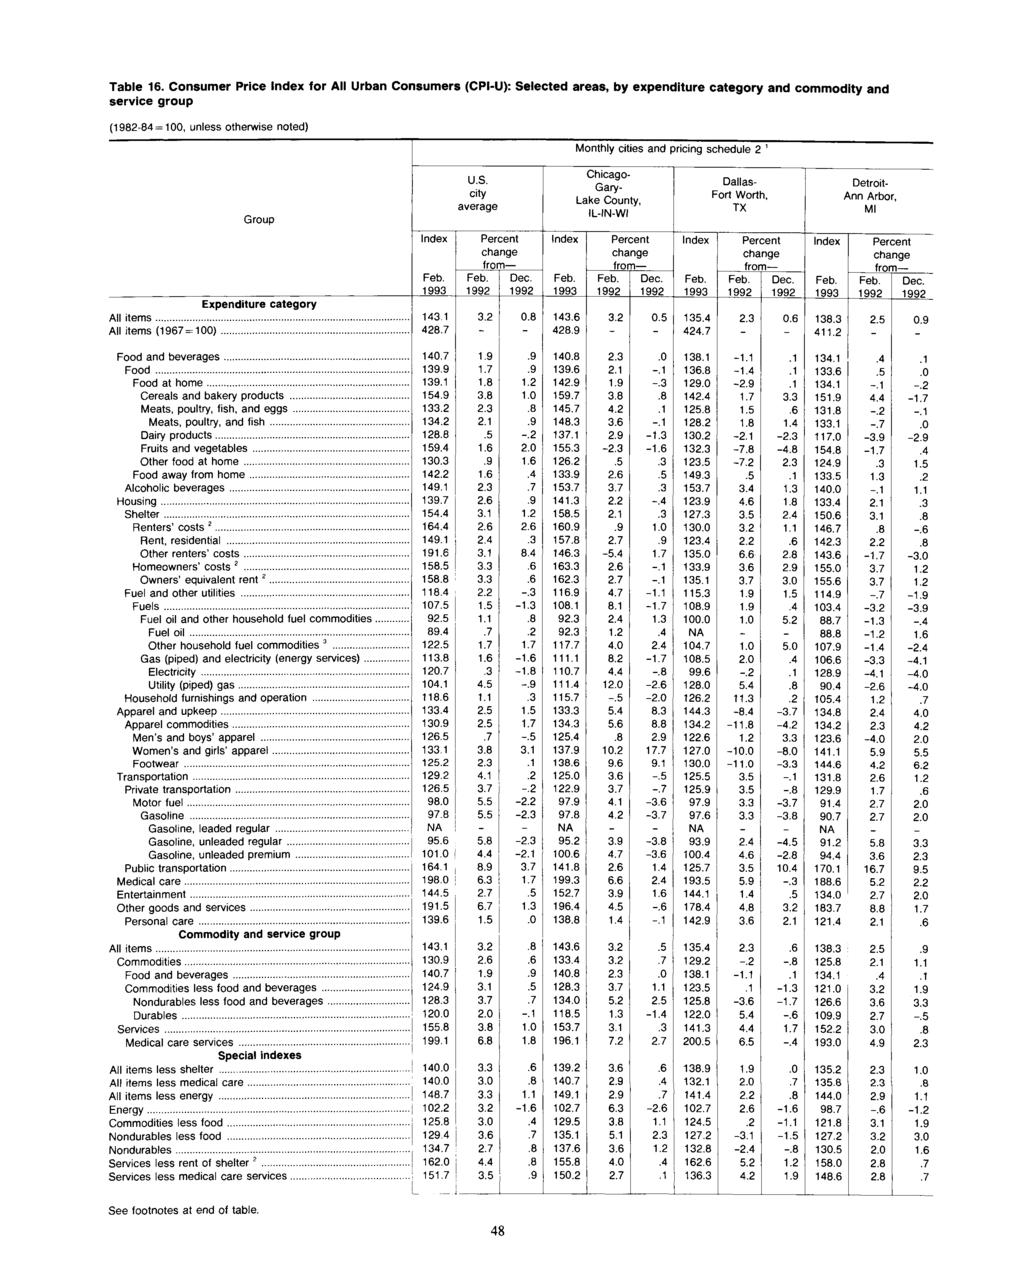 Table 16. Consumer Price for All Urban Consumers (CPI-U): Selected areas, by expenditure category and commodity and service group (1982-84=100, unless otherwise noted) Group U.S. city average Dec.